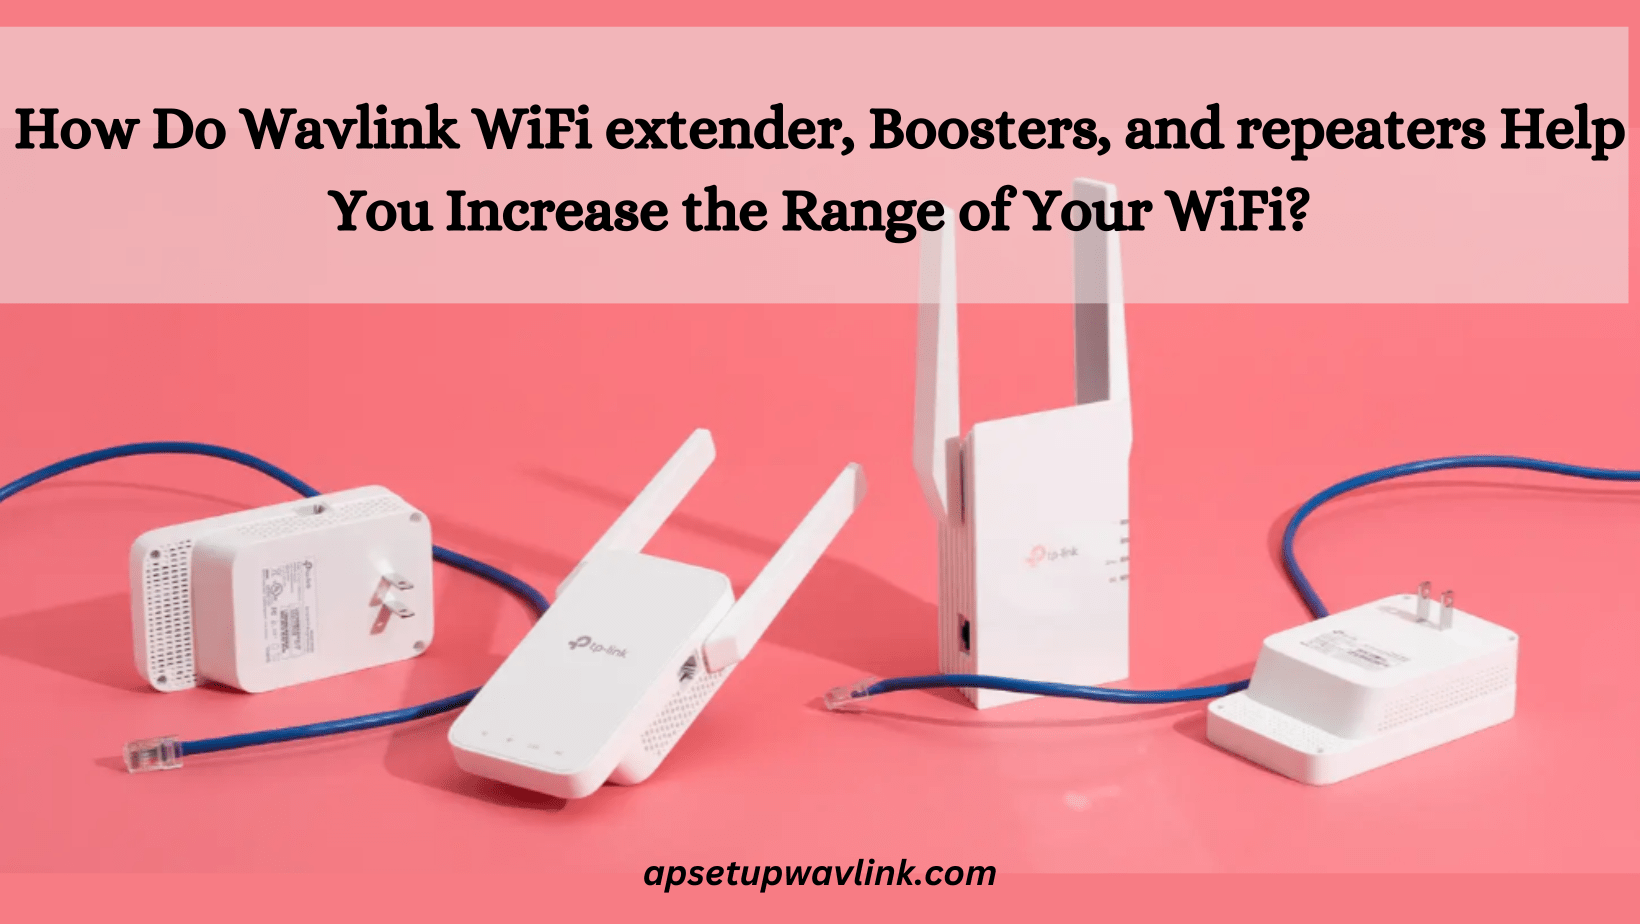 You are currently viewing How Do Wavlink WiFi extender, Boosters, and repeaters Help You Increase the Range of Your WiFi?